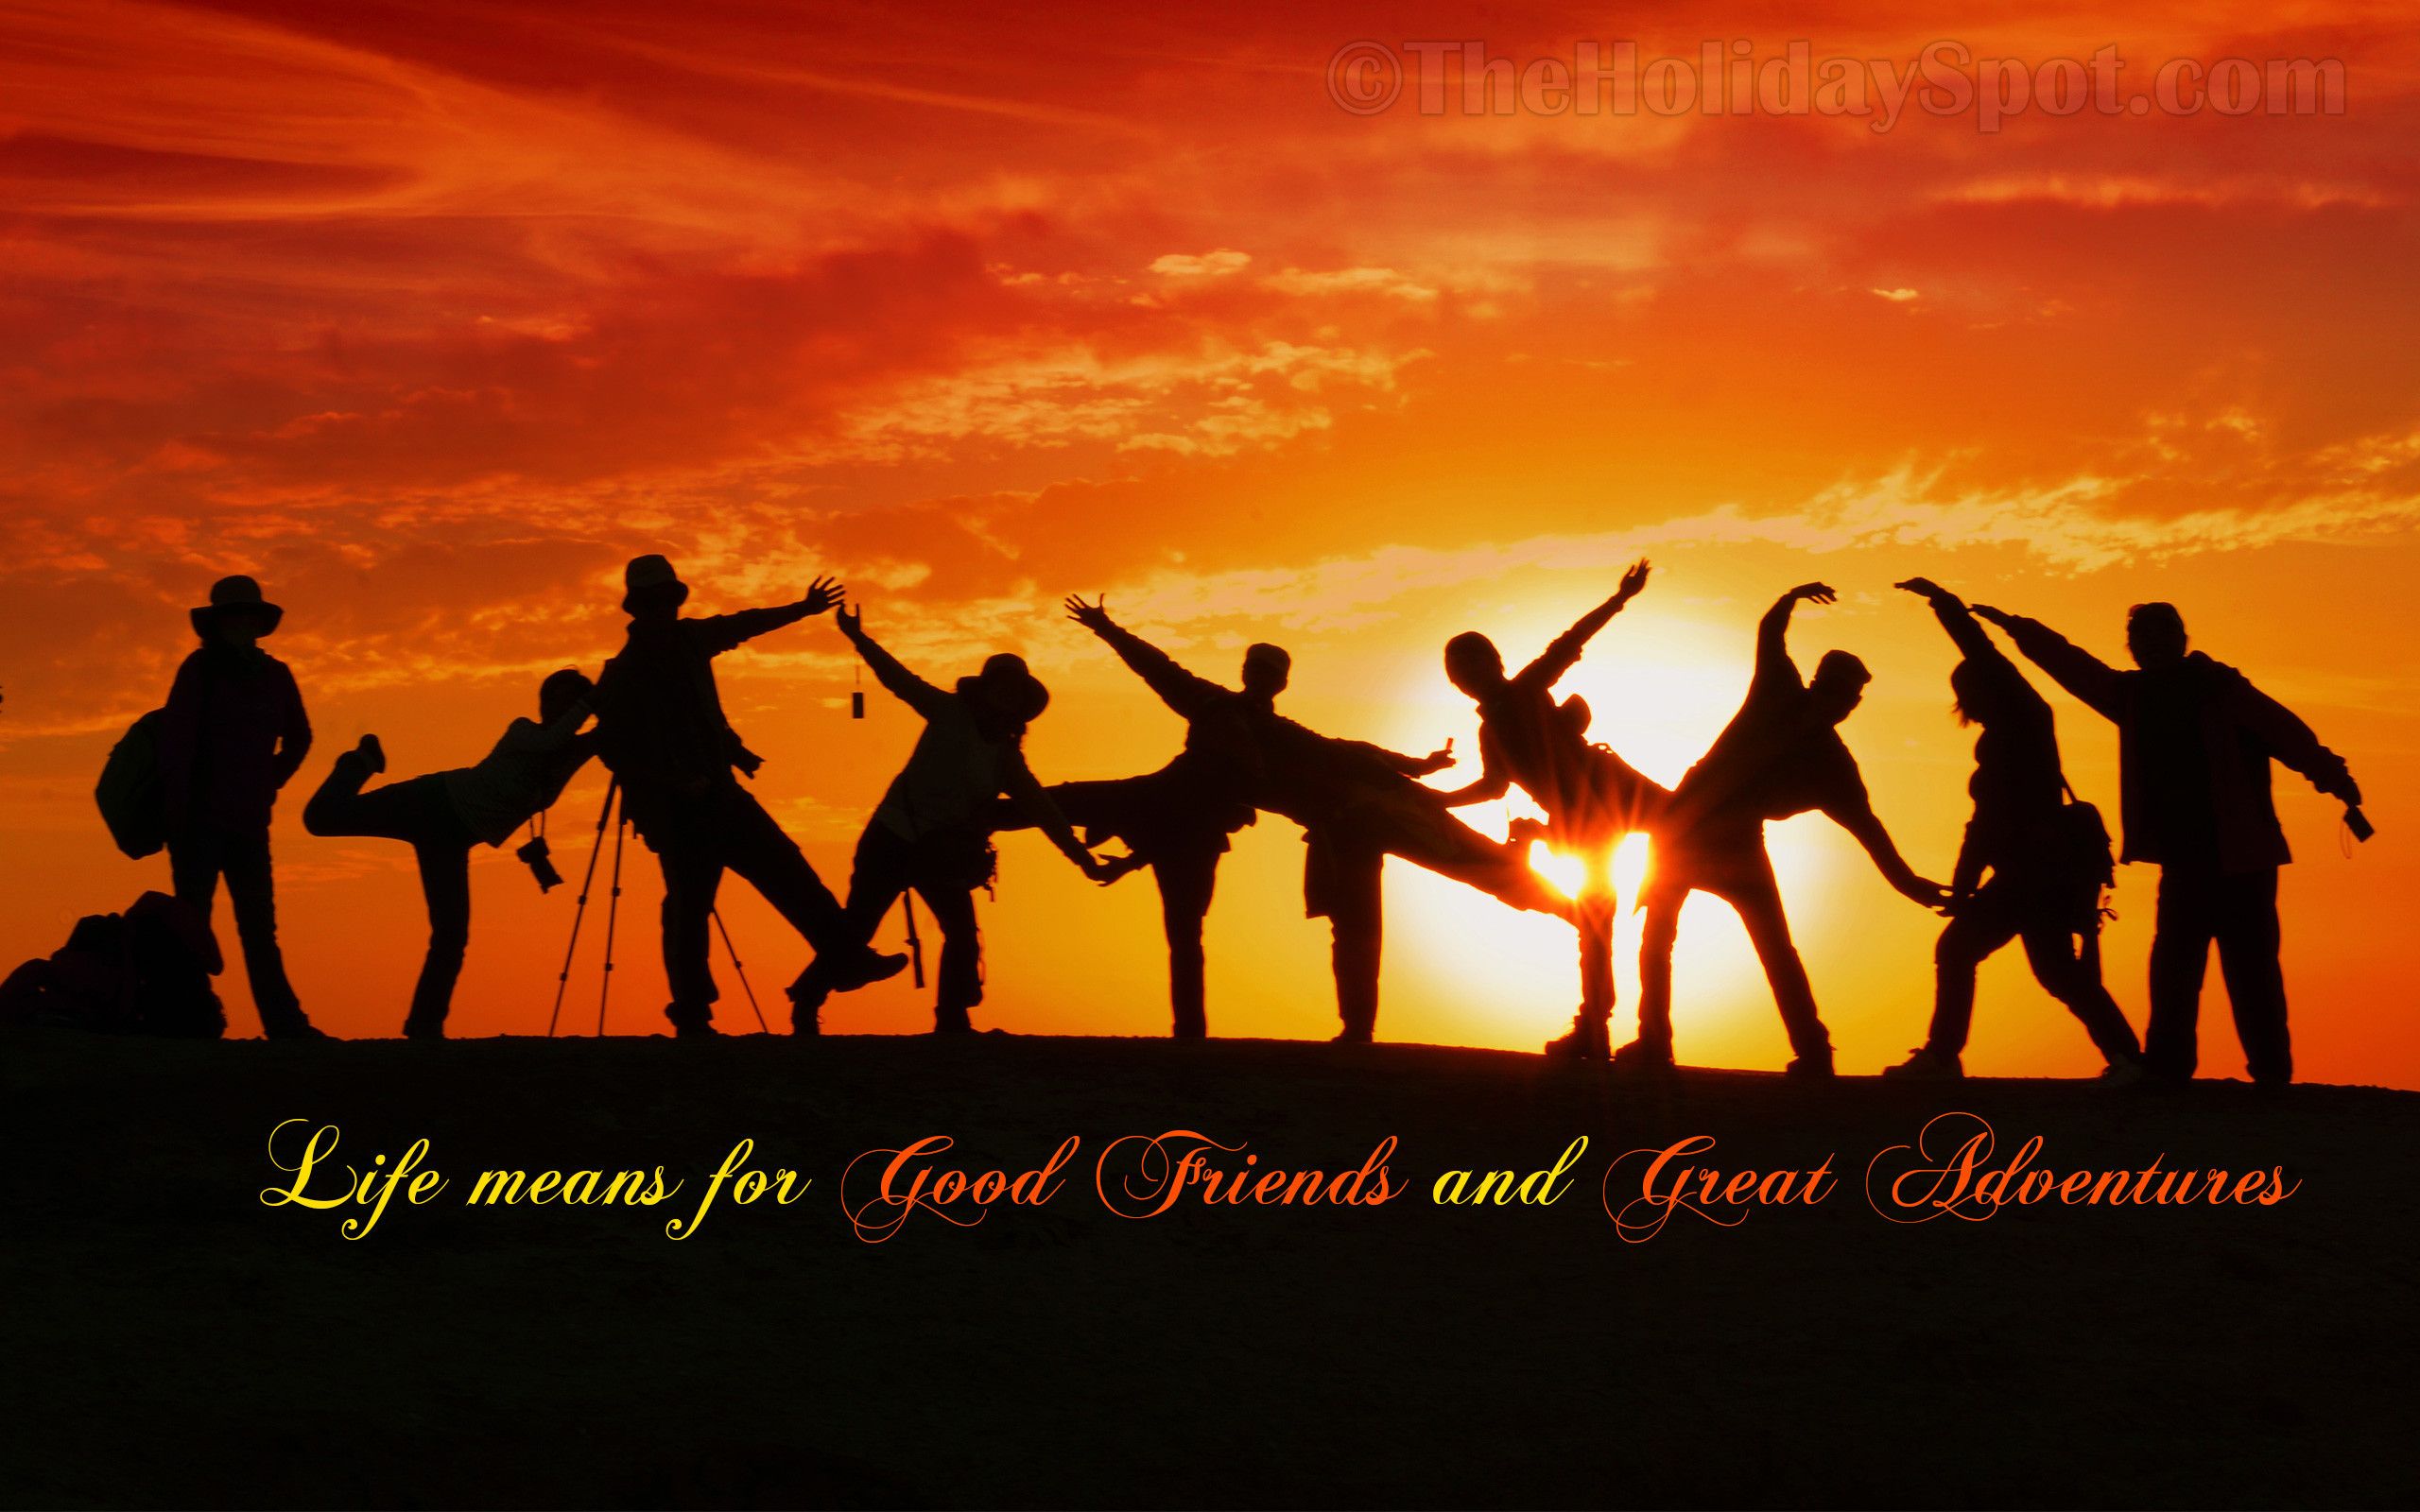 Friendship Quotes Wallpapers Free Download  Friendship Wallpapers With  Quotes Free Download is  Friendship day wallpaper Friendship images  Happy friendship day